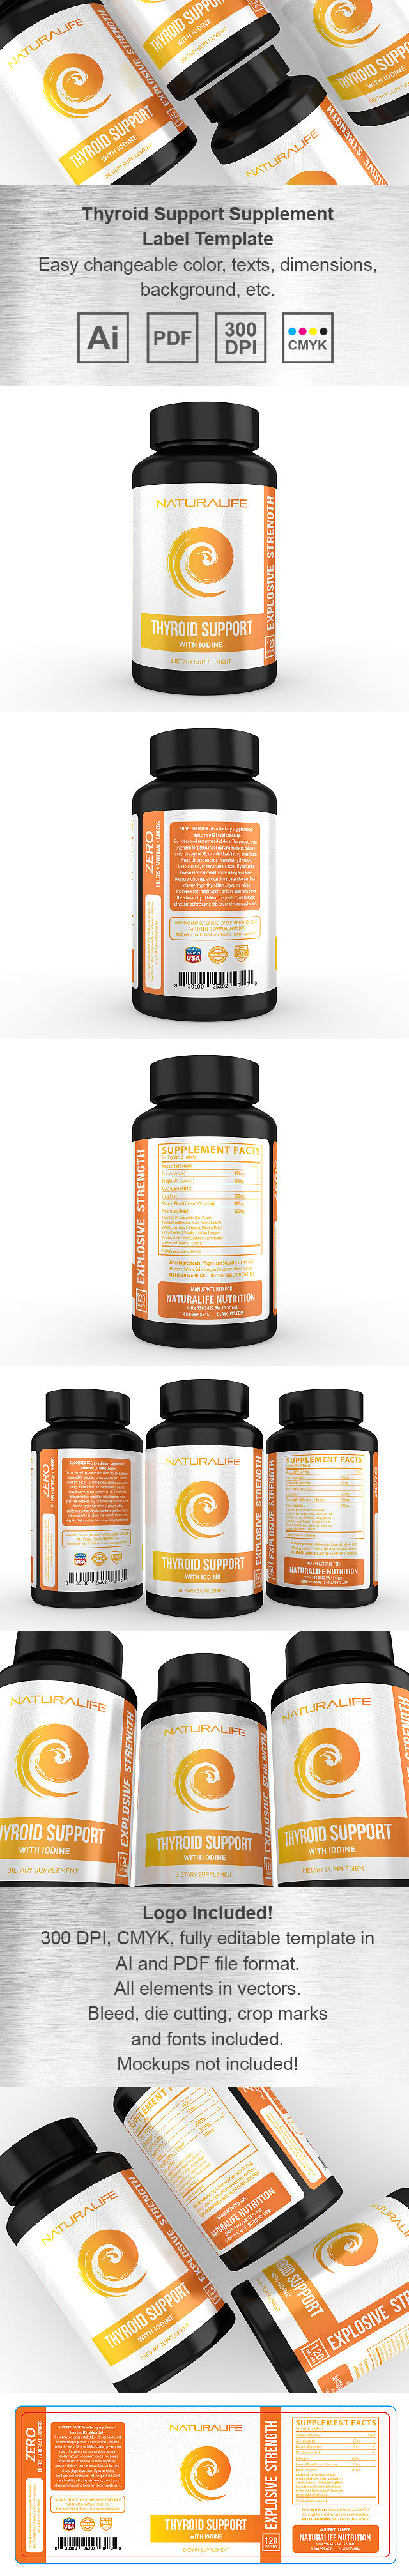 Thyroid Support Supplement Label Template